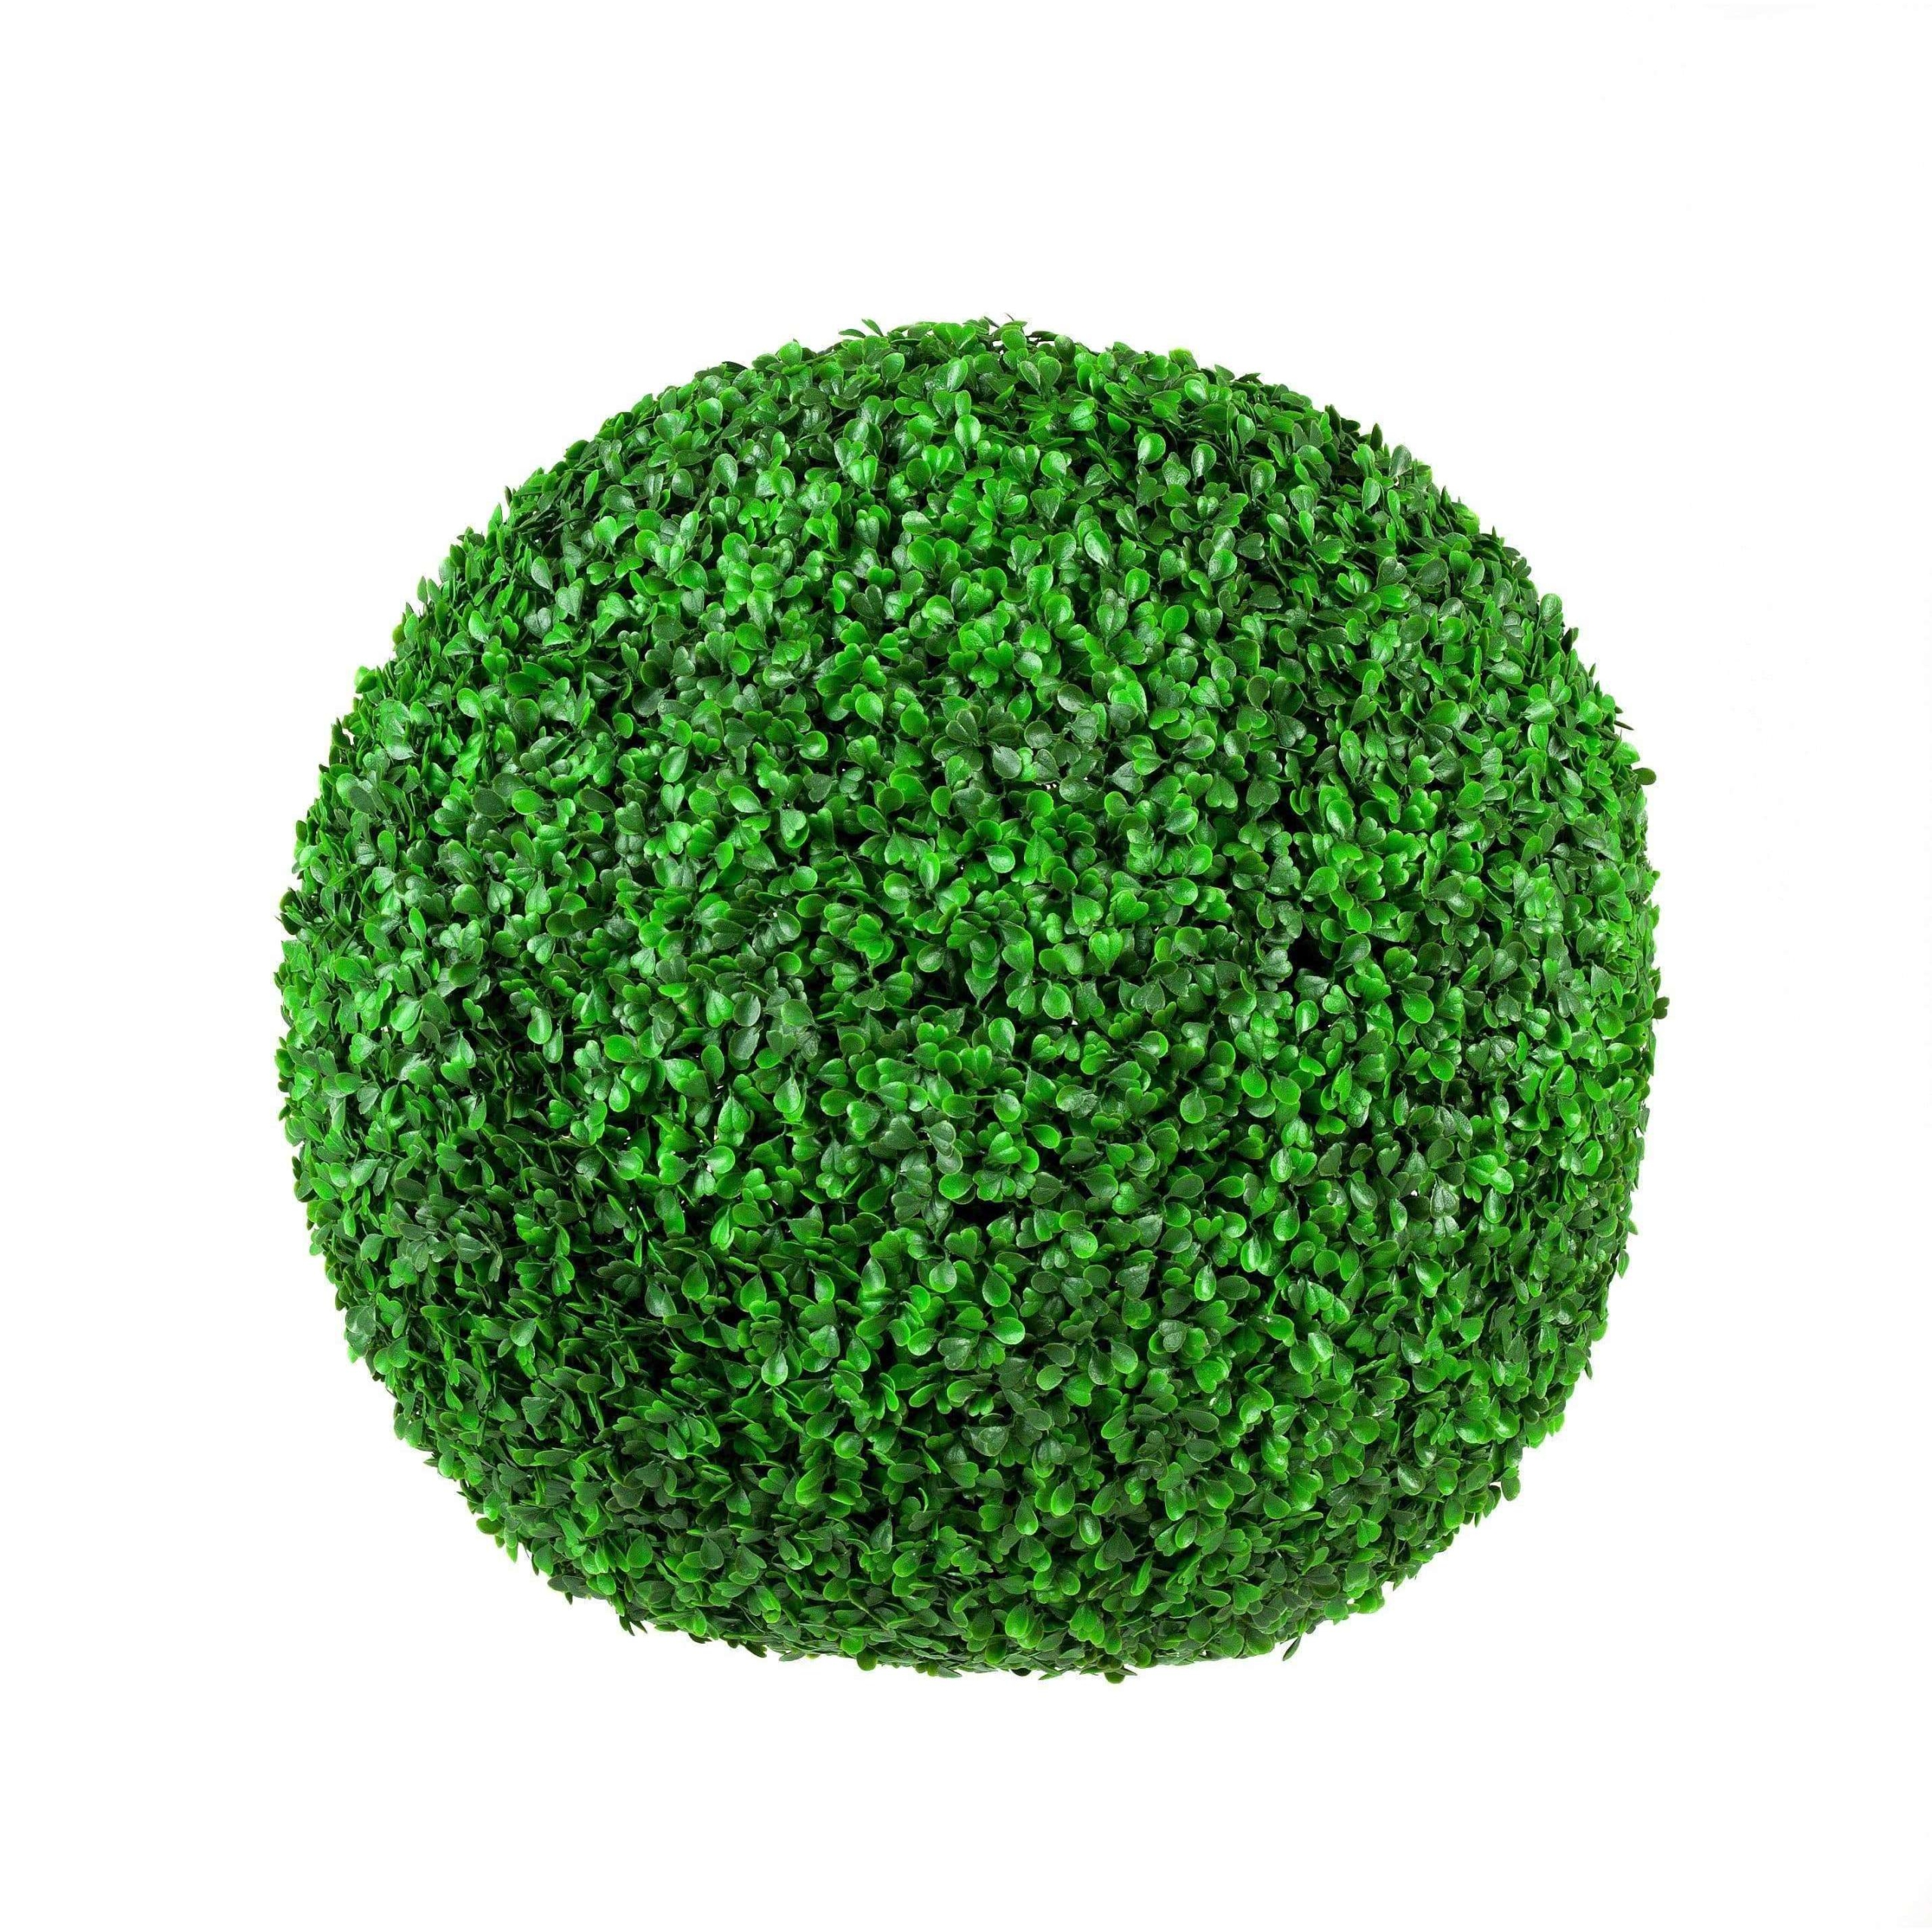 large-artificial-uv-resistant-boxwood-topiary-ball-48cm-811554.jpg